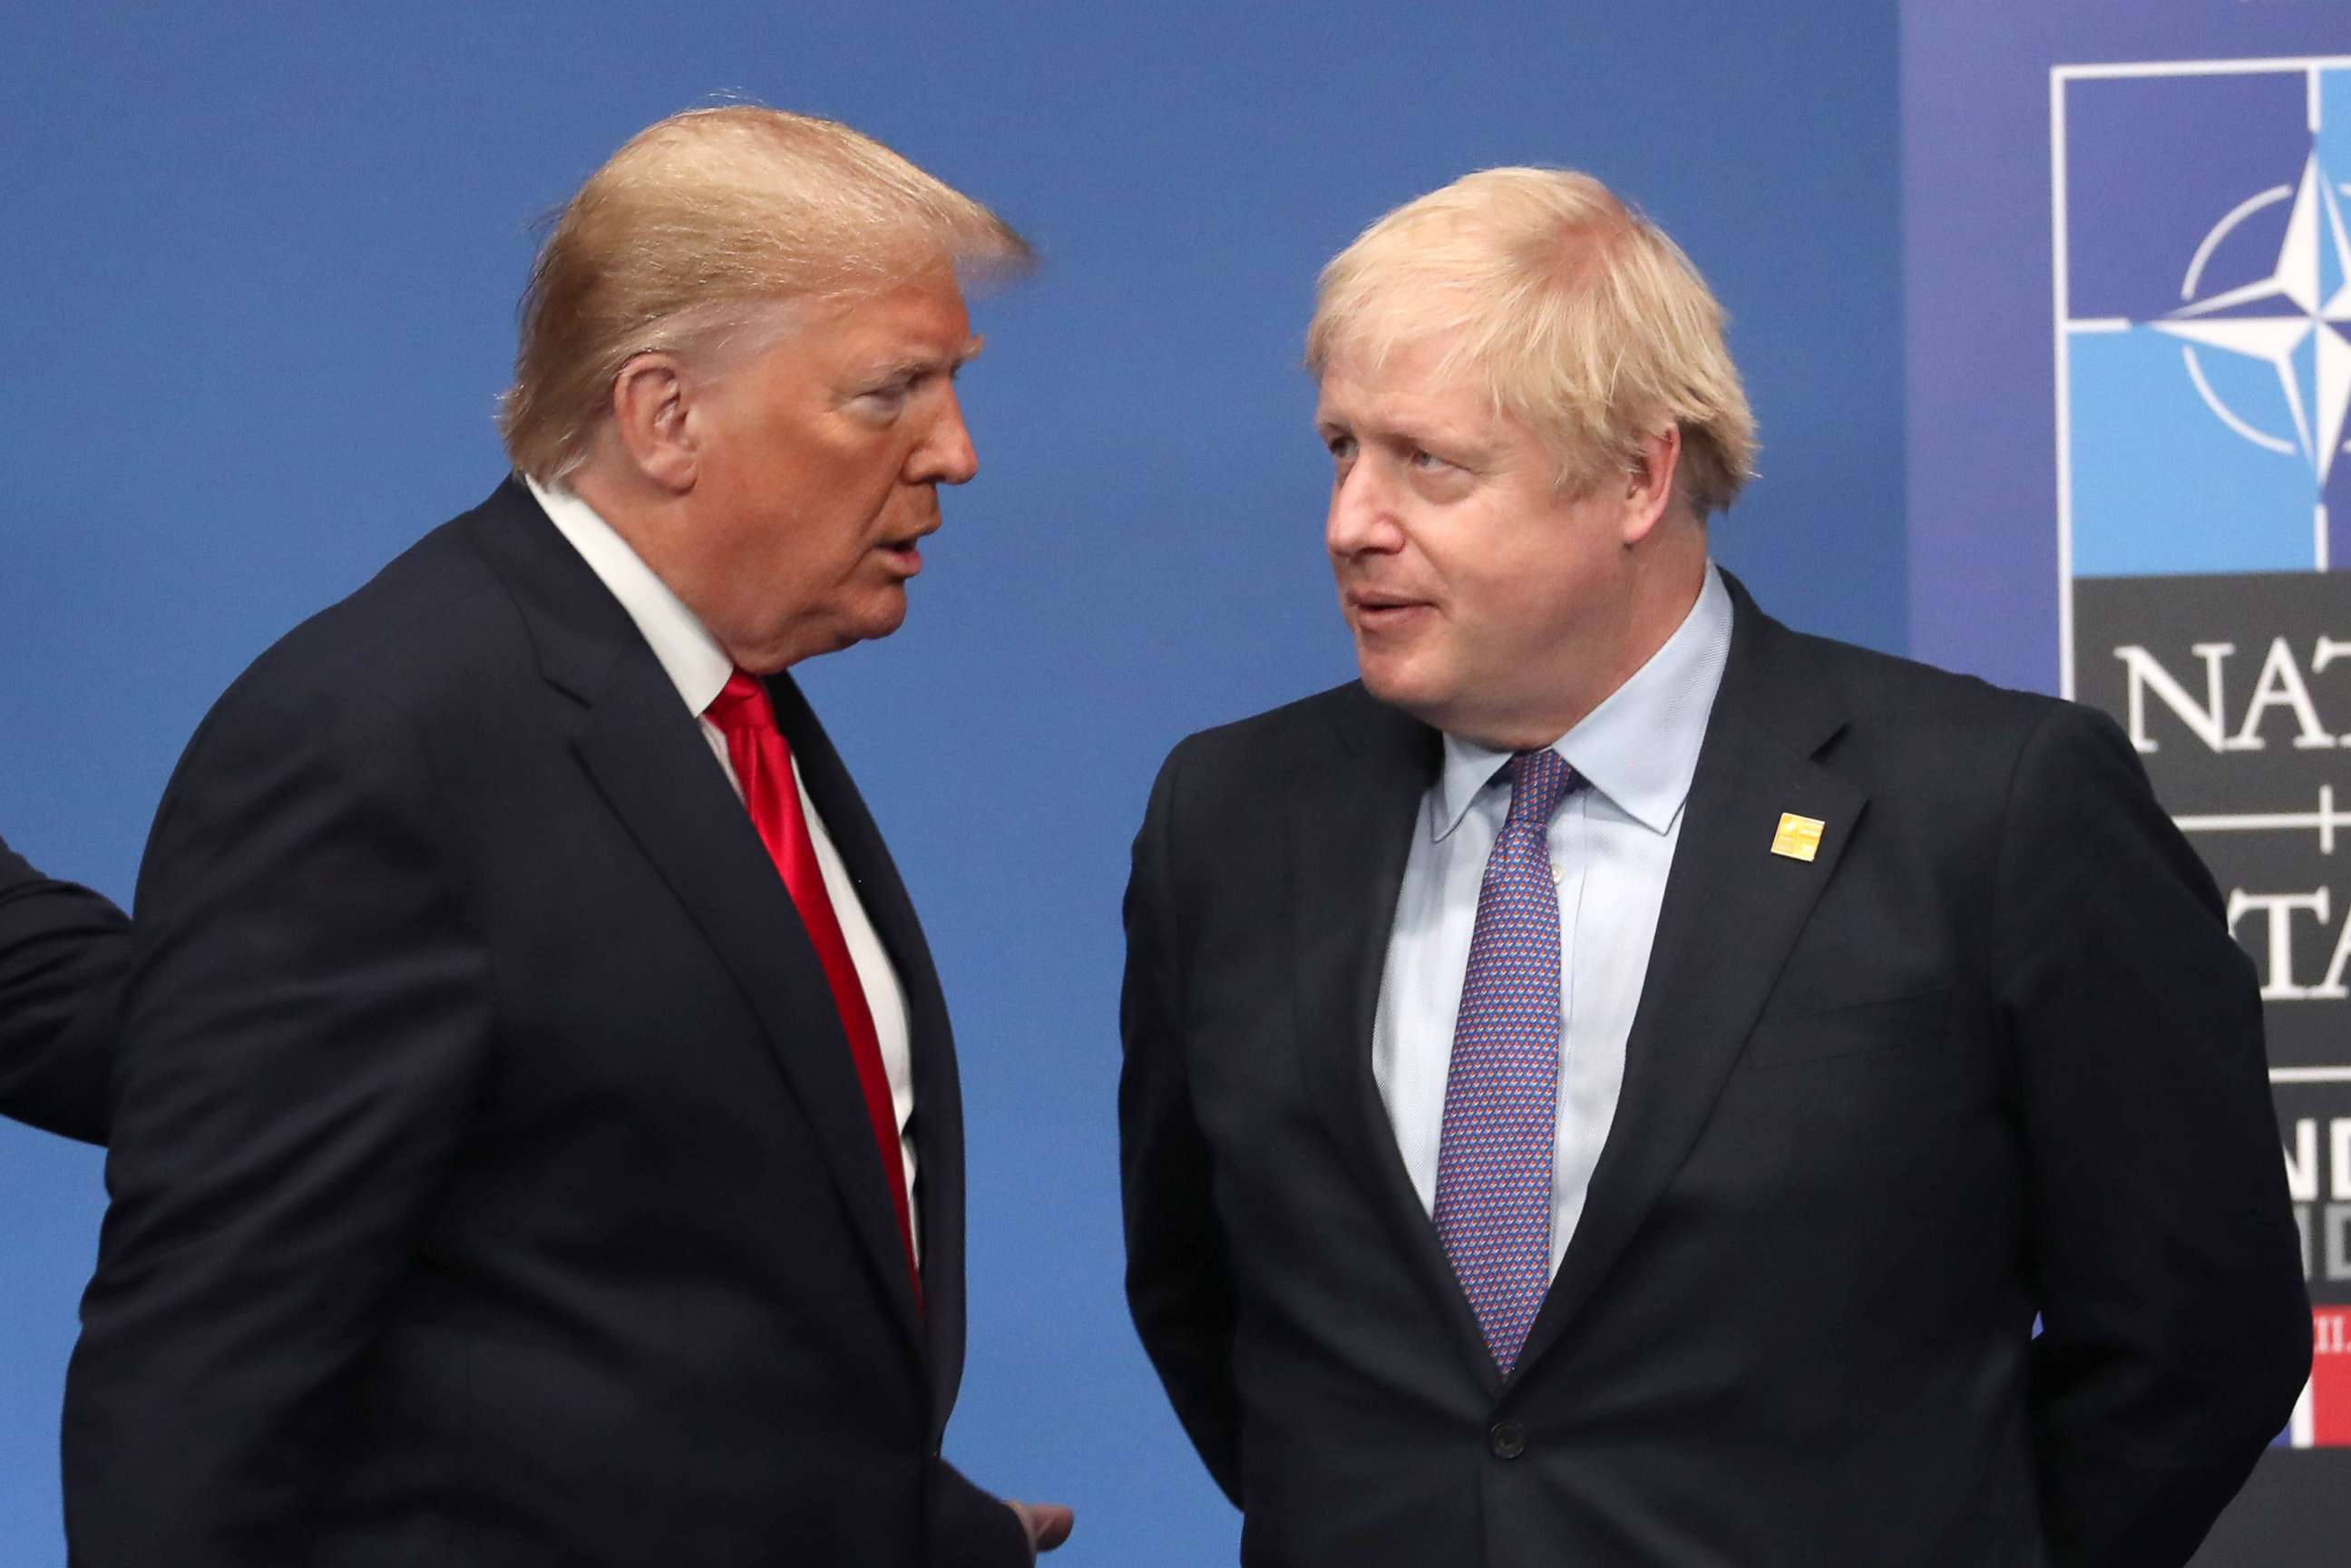 PHOTO: President Donald Trump and British Prime Minister Boris Johnson onstage during the annual NATO heads of government summit on Dec. 4, 2019, in Watford, England.